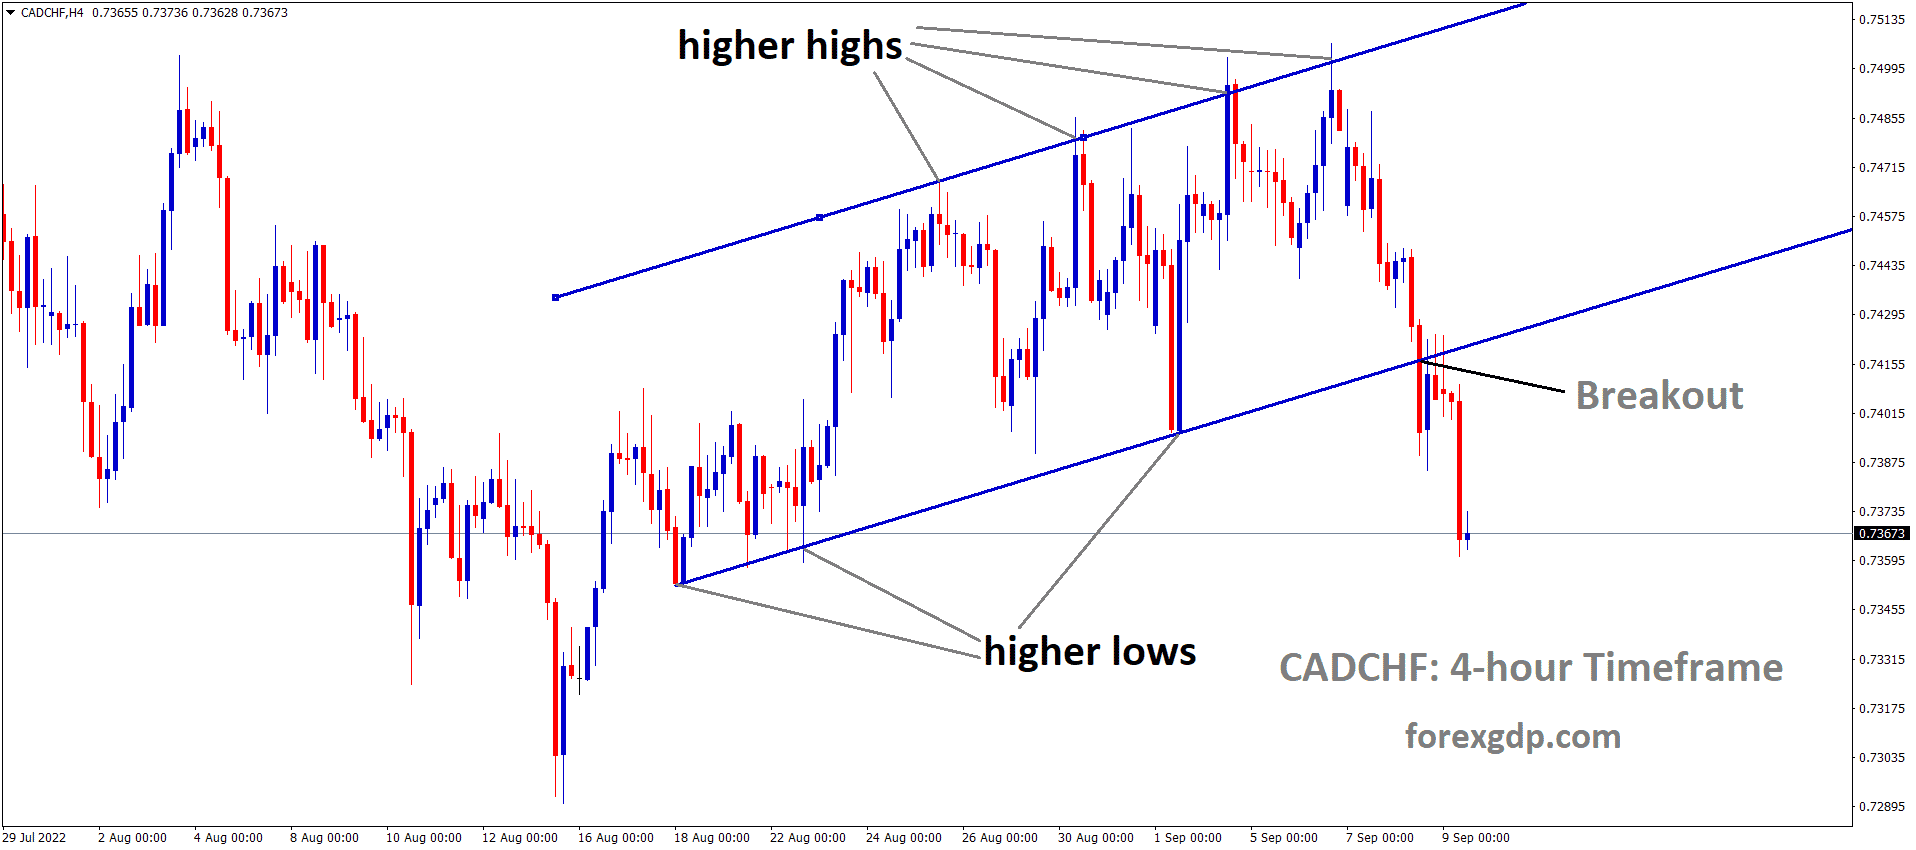 CADCHF has broken the Ascending channel in Downside.